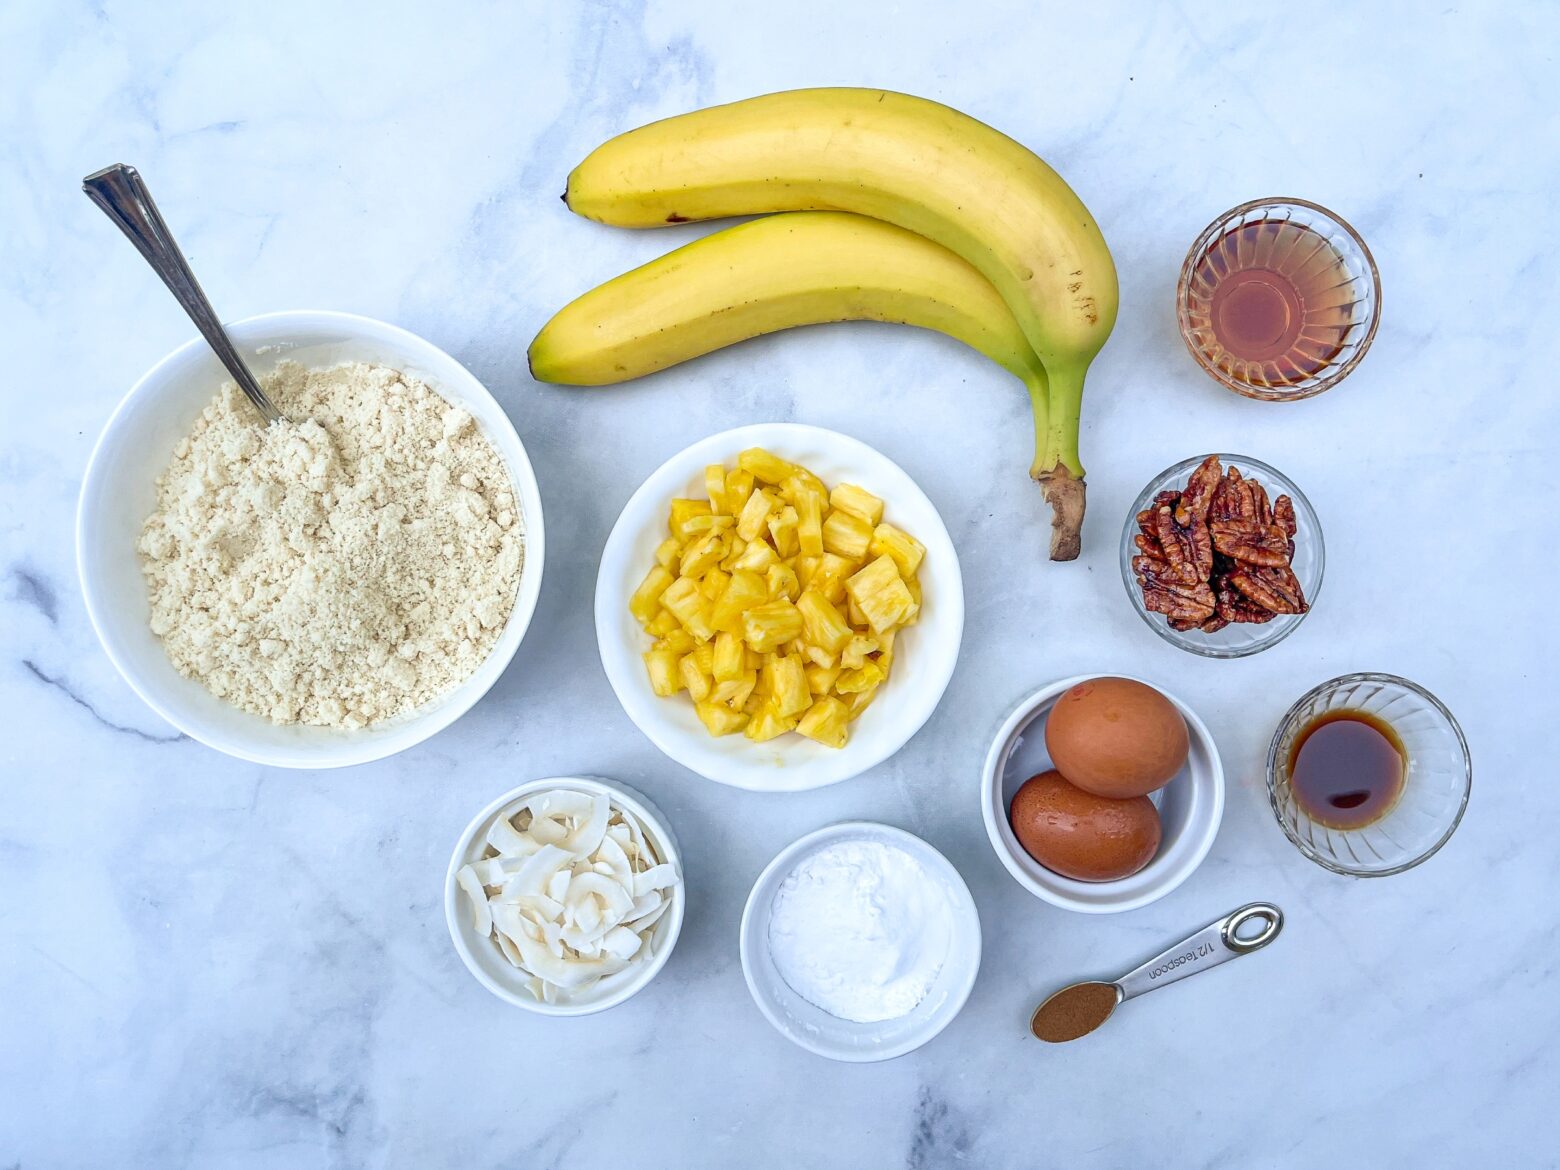 Ingredients for Pineapple Coconut Muffins